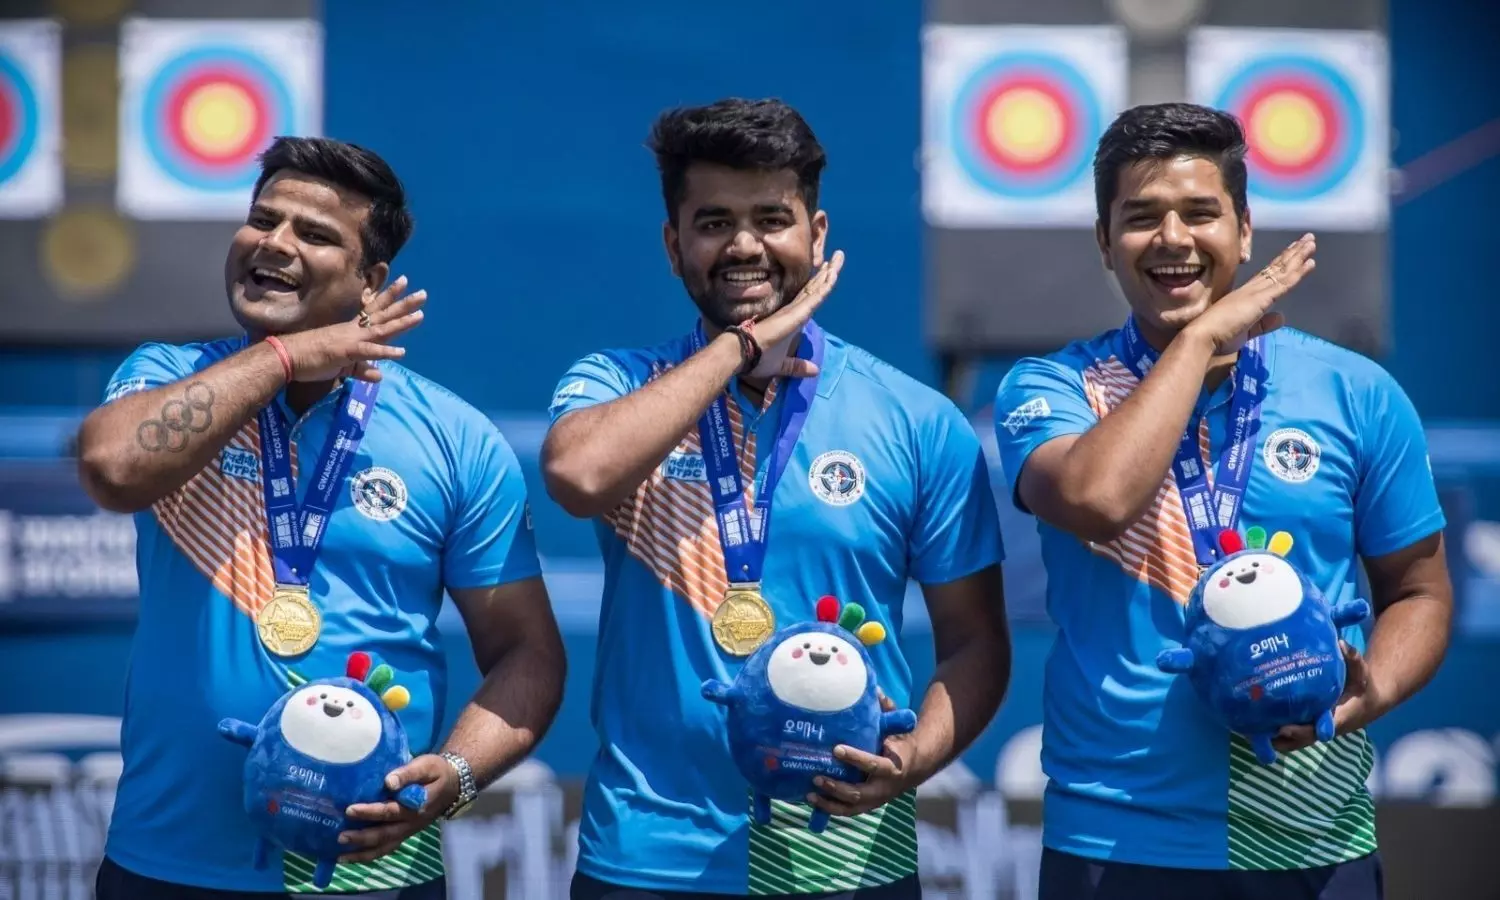 Today in Gwangju, South Korea, the Indian men's compound team won, 2 successive Golds at the World Cup for the Indian Compound Men Team